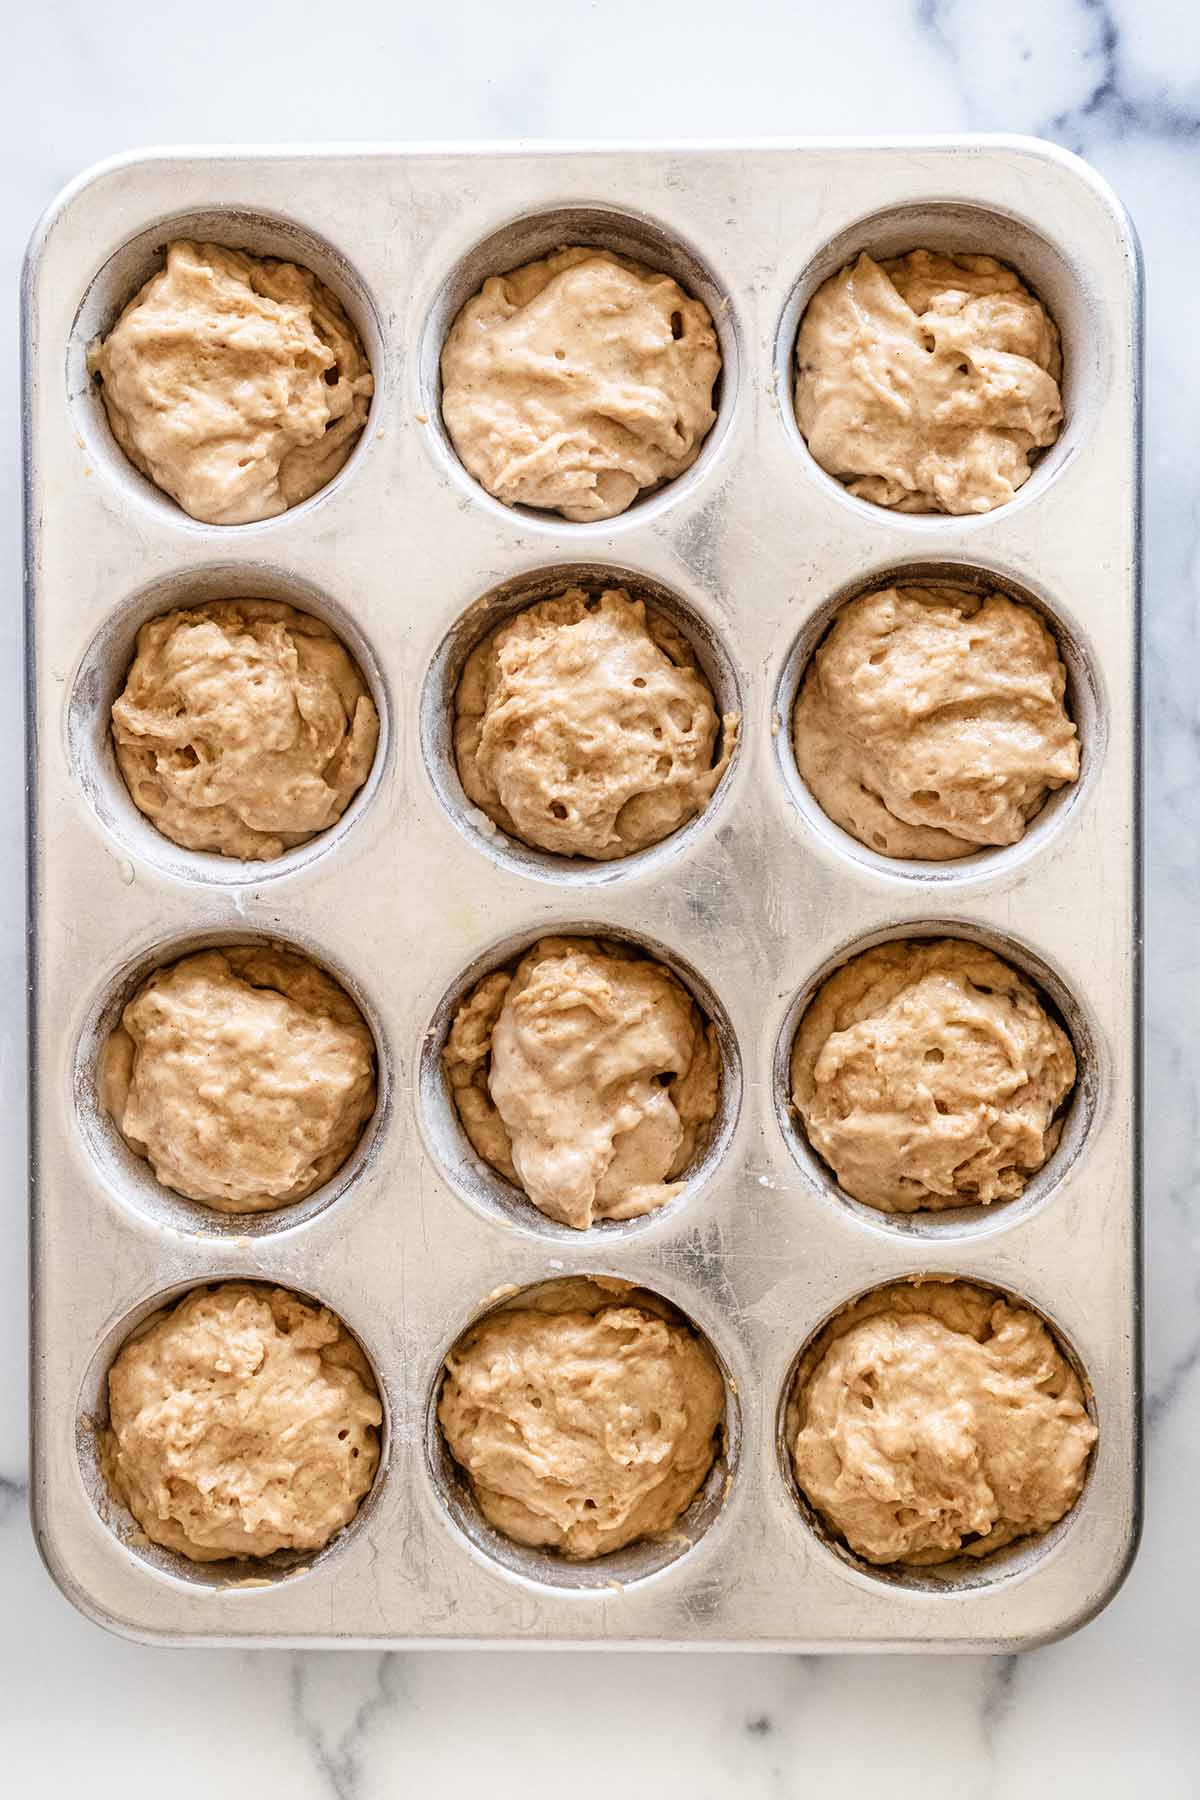 Muffin batter covering Nutella in a 12-cup muffin tin.